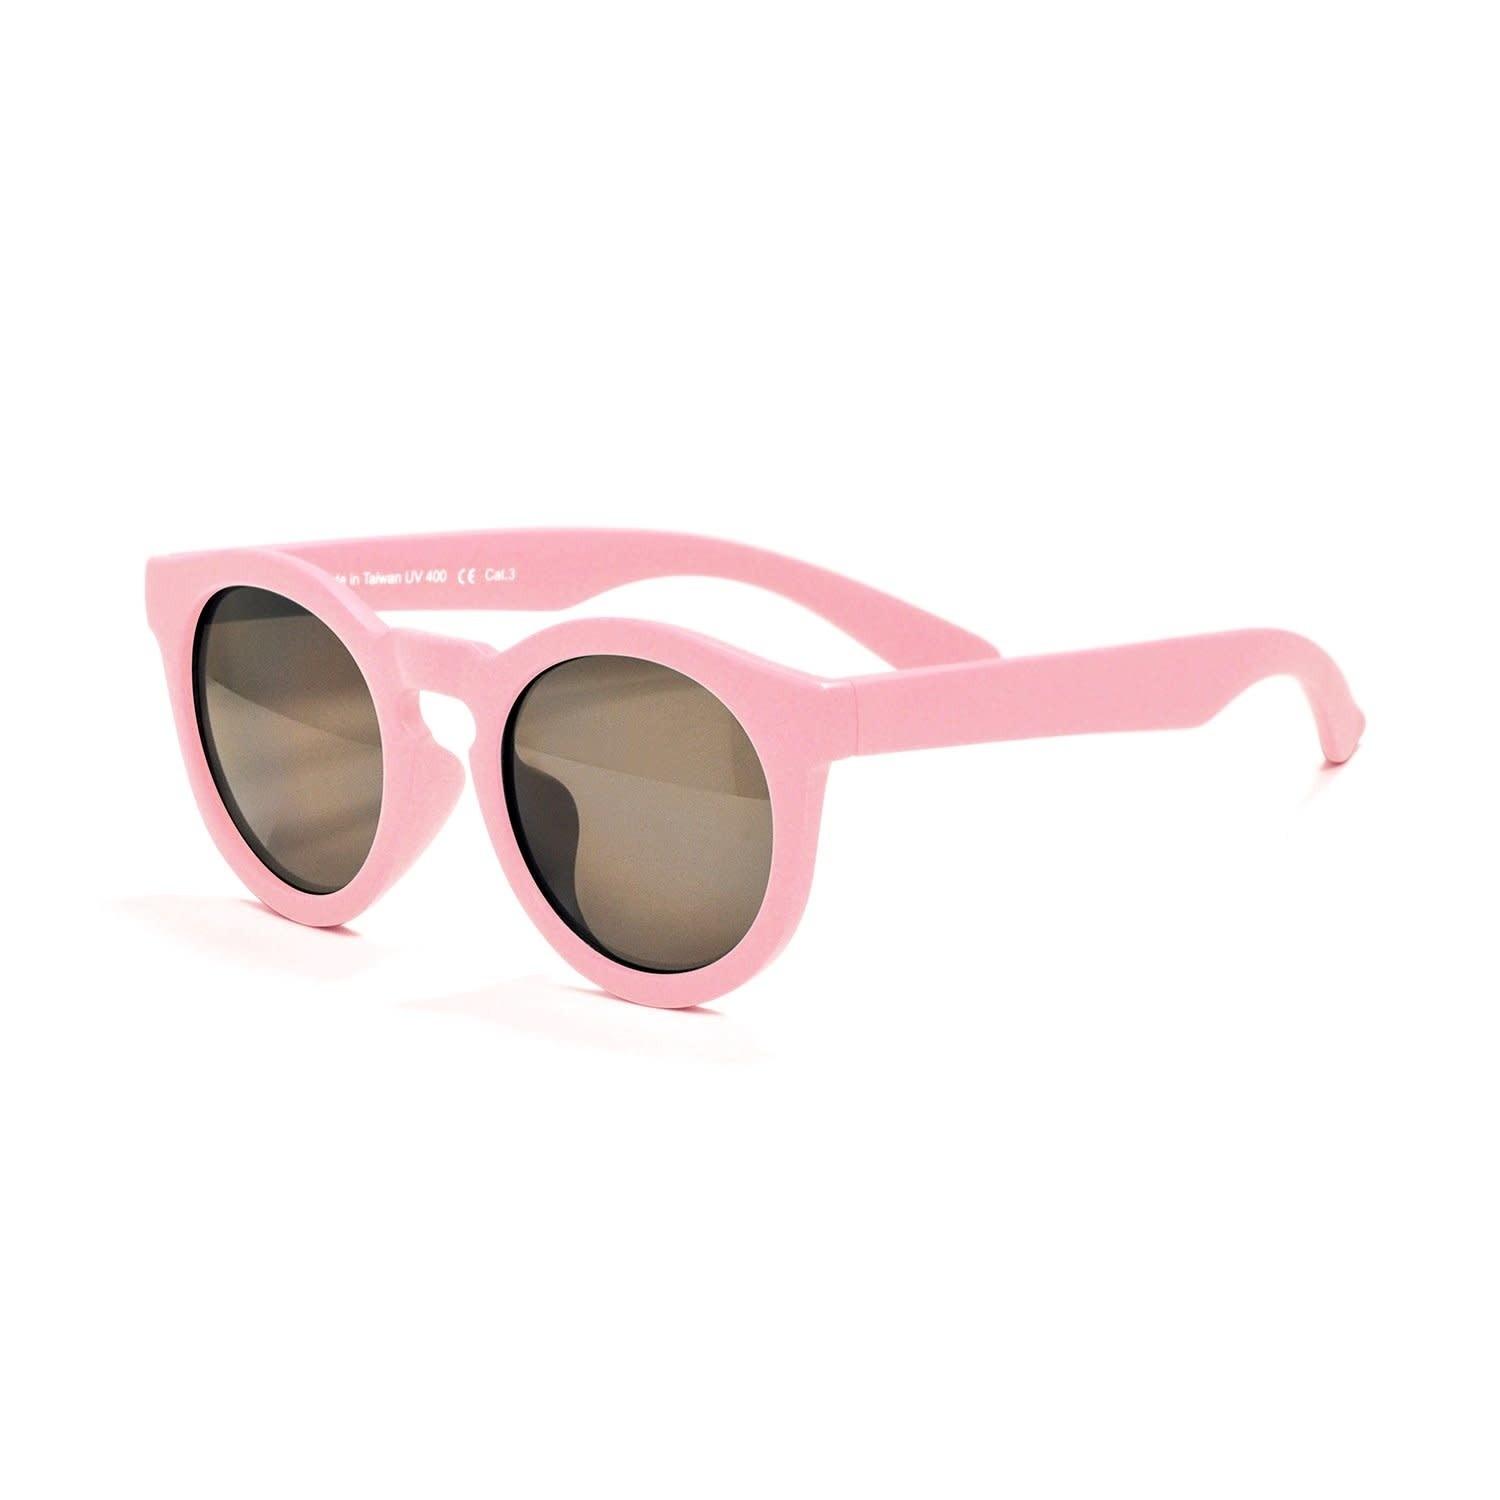 Real Shades - Chill dusty rose size 2+